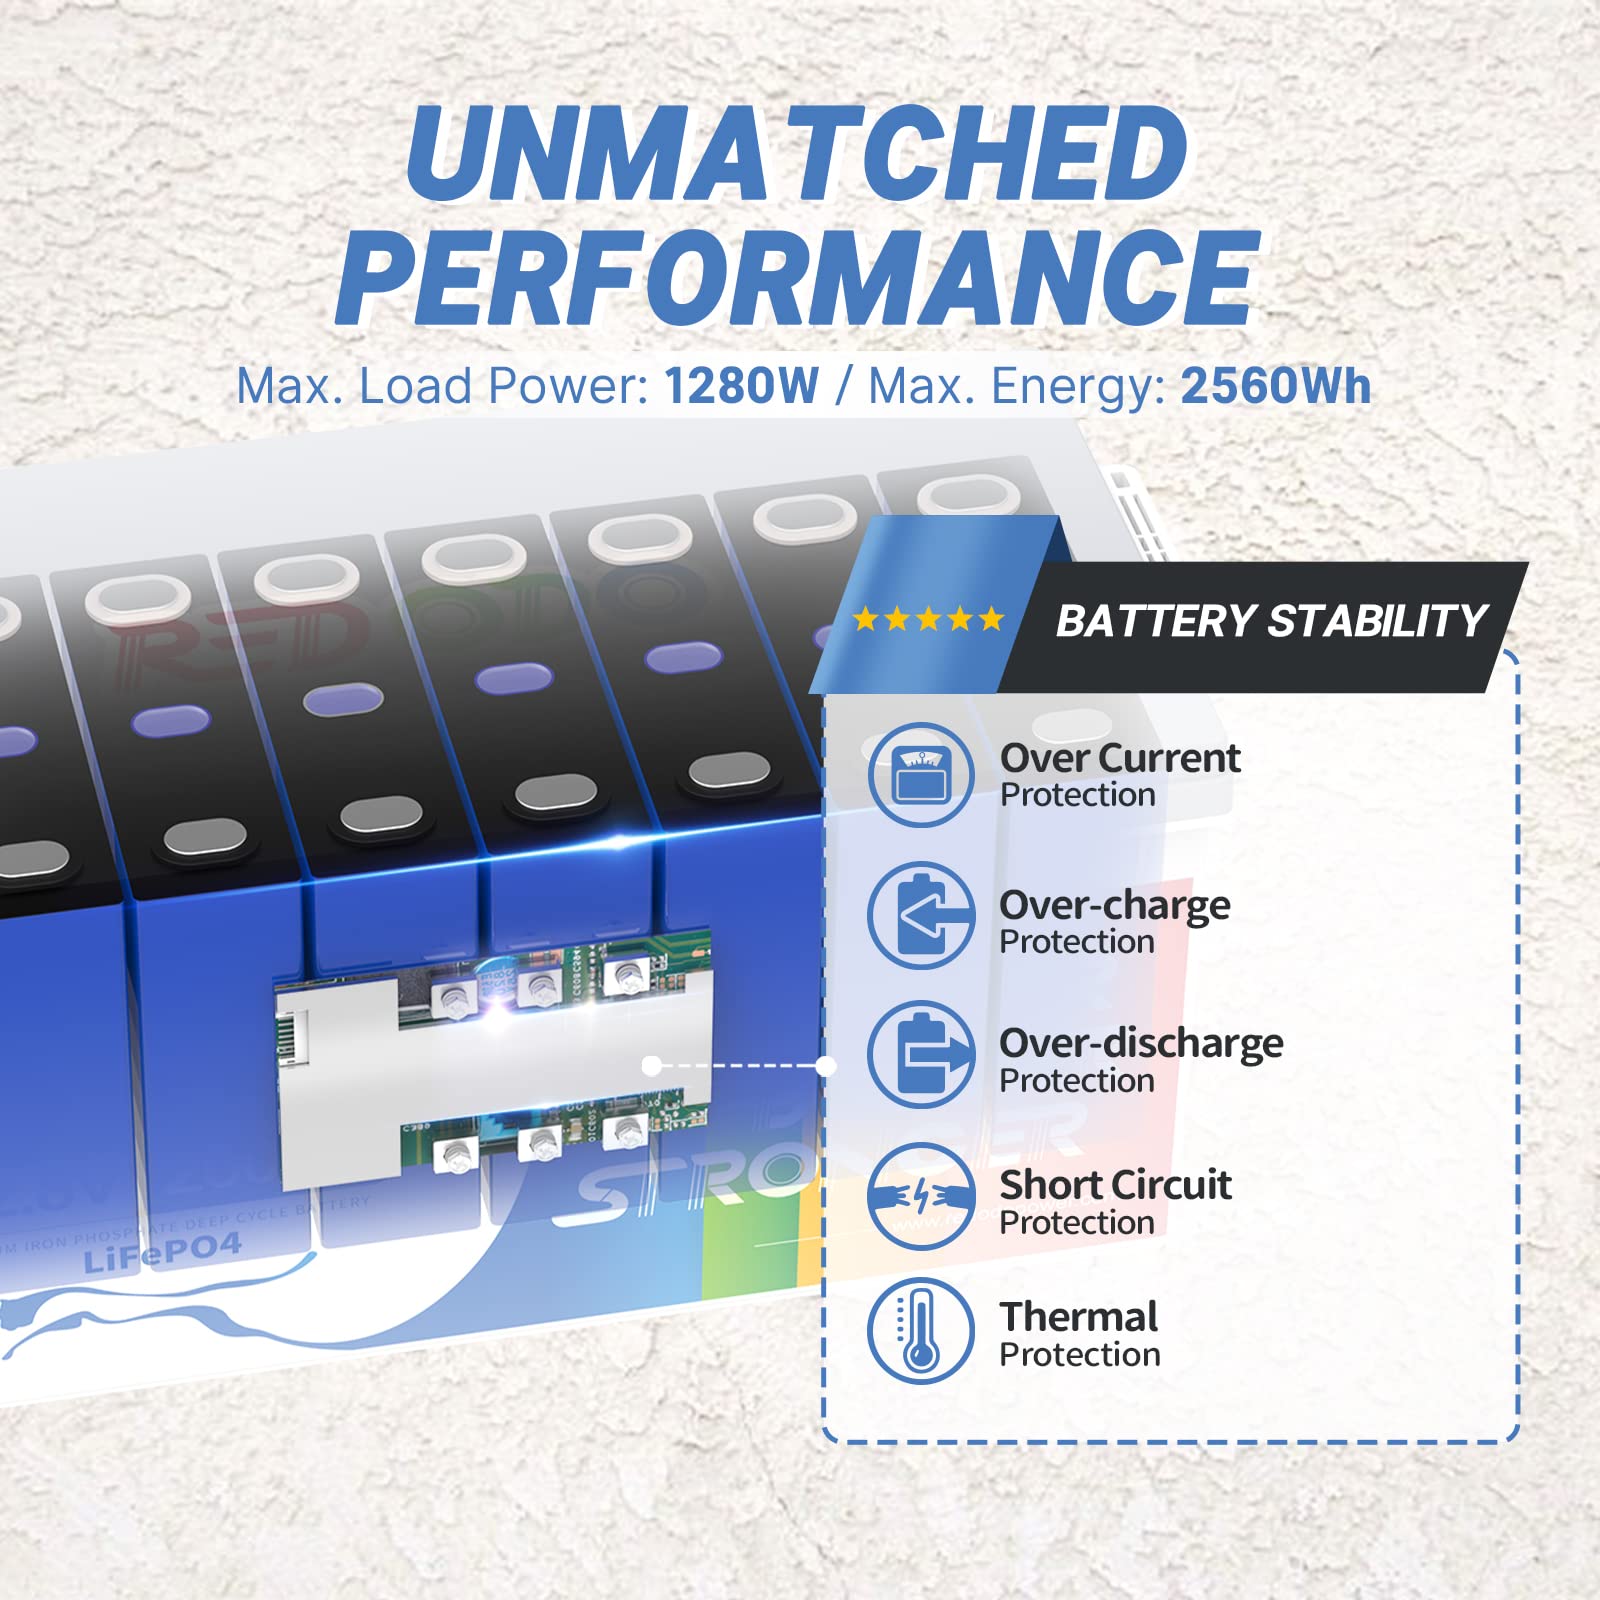 Redodo 12V 200Ah LiFePO4 Battery Lithium Battery with 100A BMS, Rechargeable 4000-15000 Deep Cycles & 10-Year Lifetime, Perfect for RV, Camping, Boats, Trolling Motor, Solar Home System, etc.